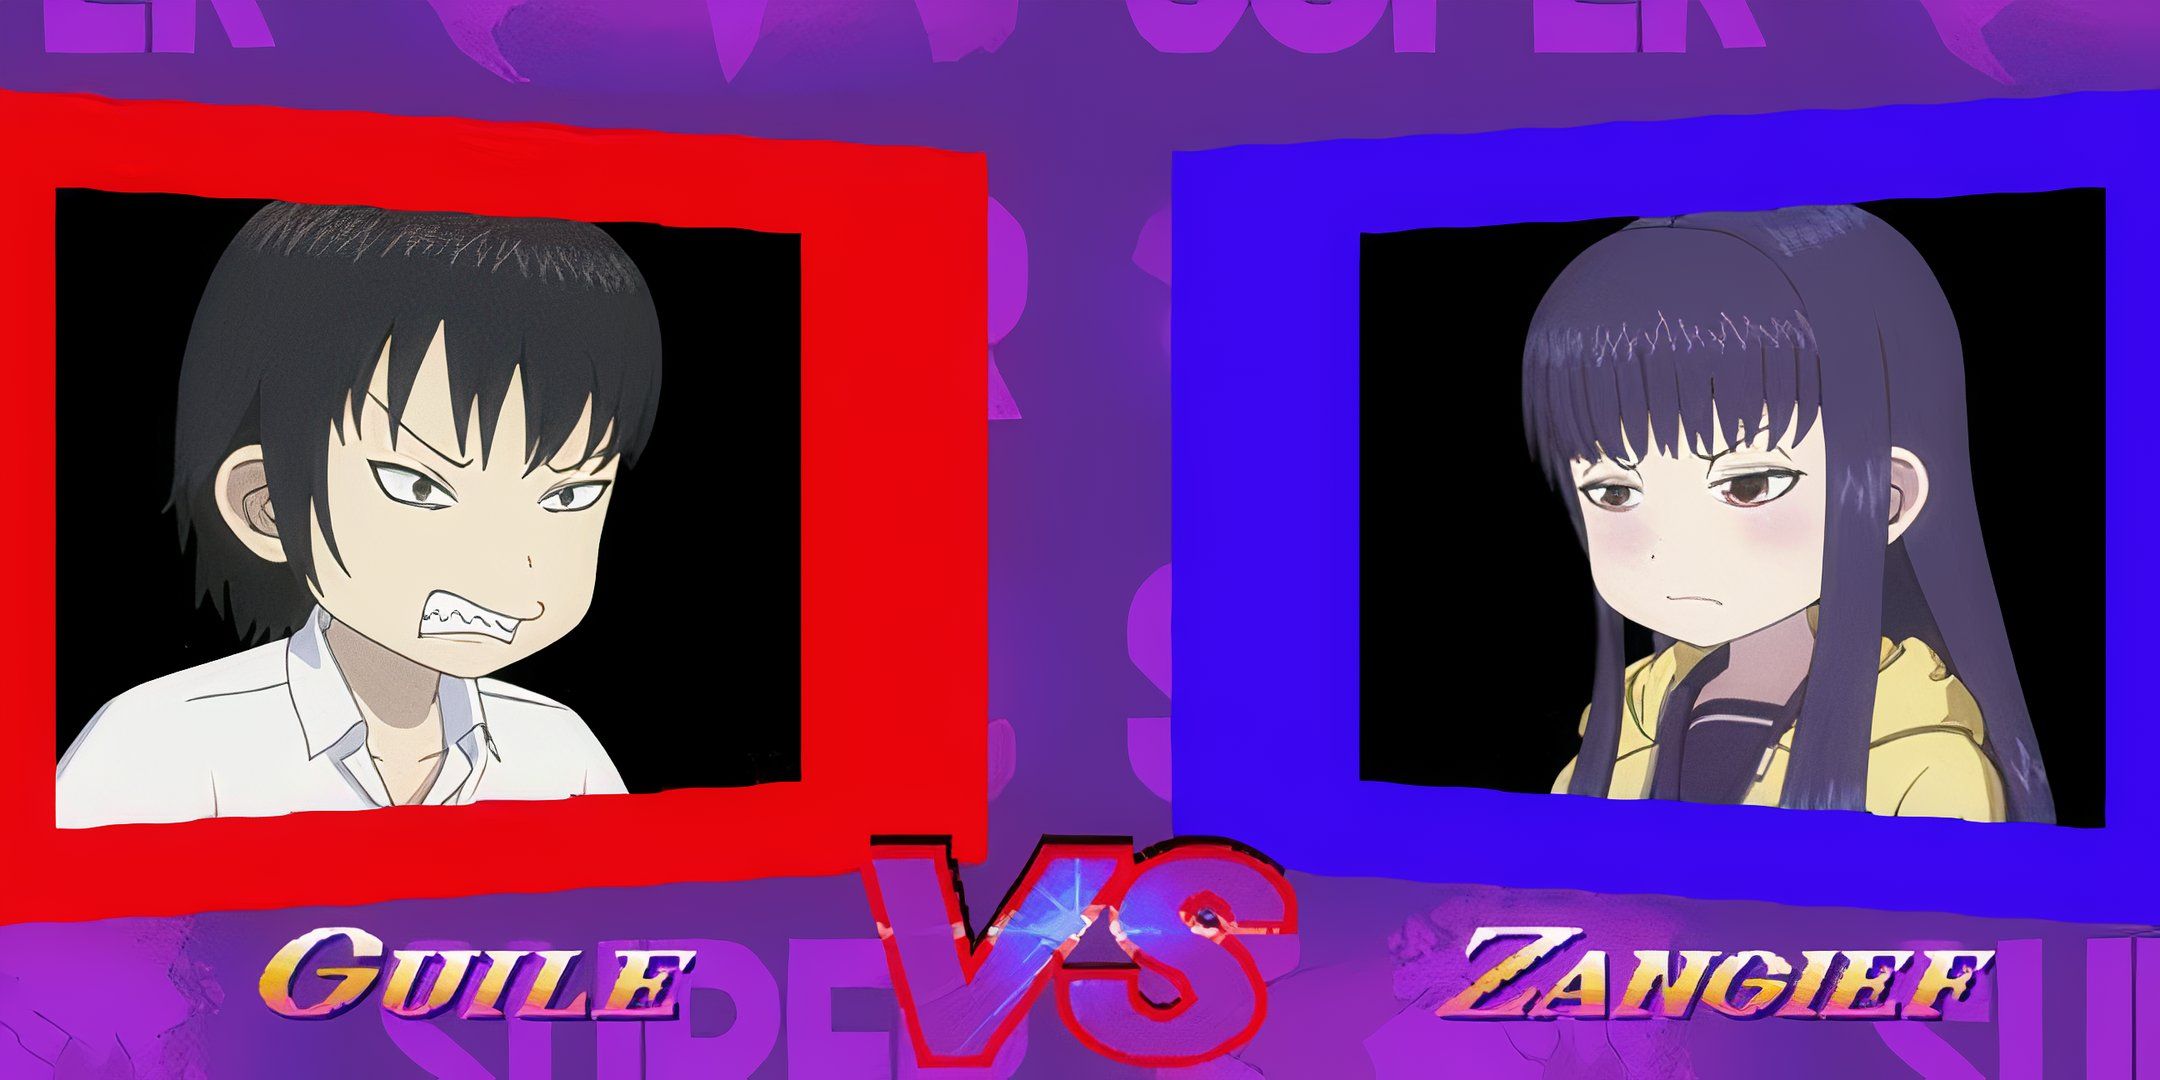 Haruo and Akira face off in an aracade game.